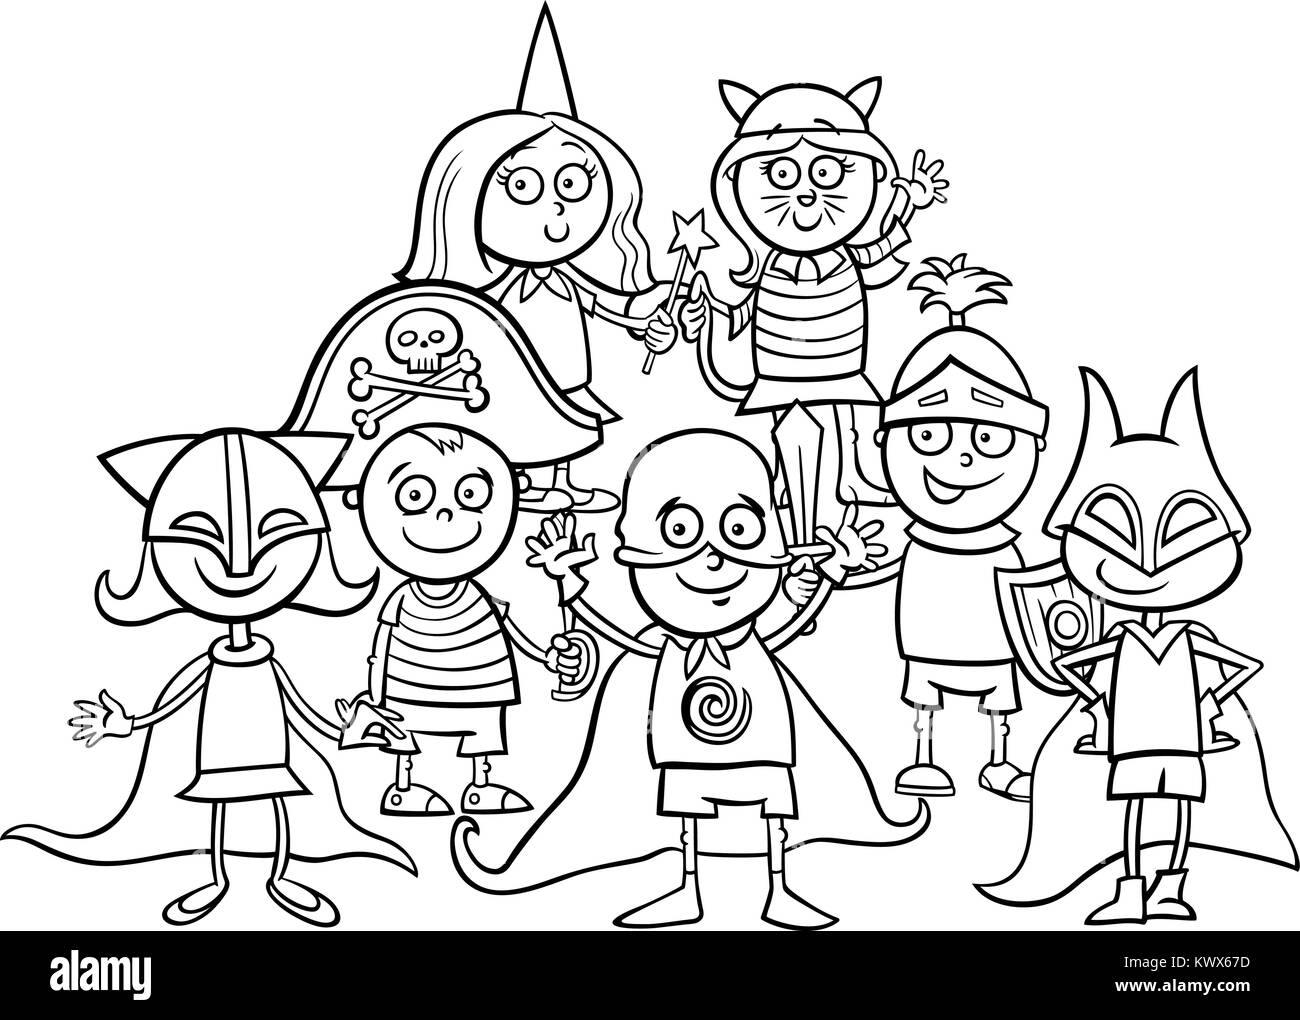 Black and White Cartoon Illustration of Elementary Age Children Characters at the Mask Ball Coloring Book Stock Vector